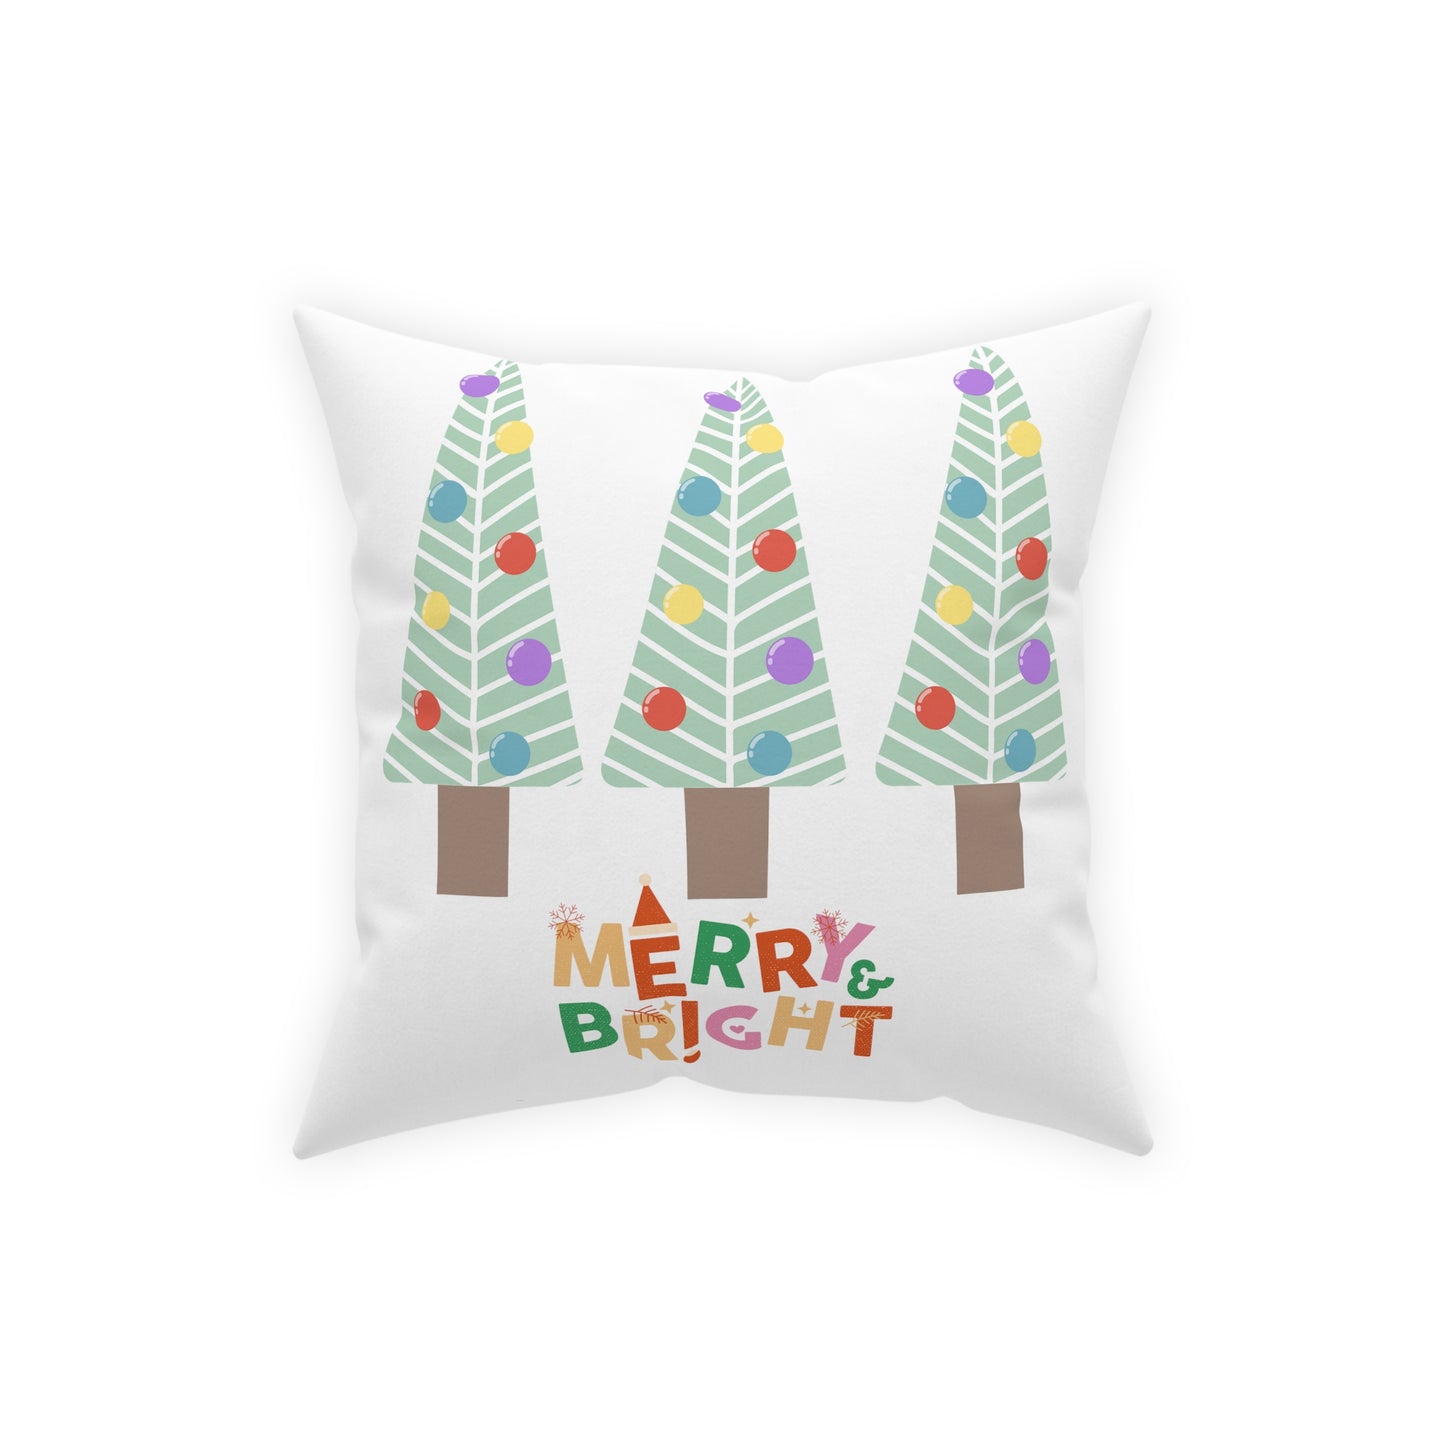 Christmas Tree Decorative Pillow, Merry and Bright Holiday Pillow, Christmas Gift, Housewarming Gift, Retro Vintage Christmas, - Design Club Home